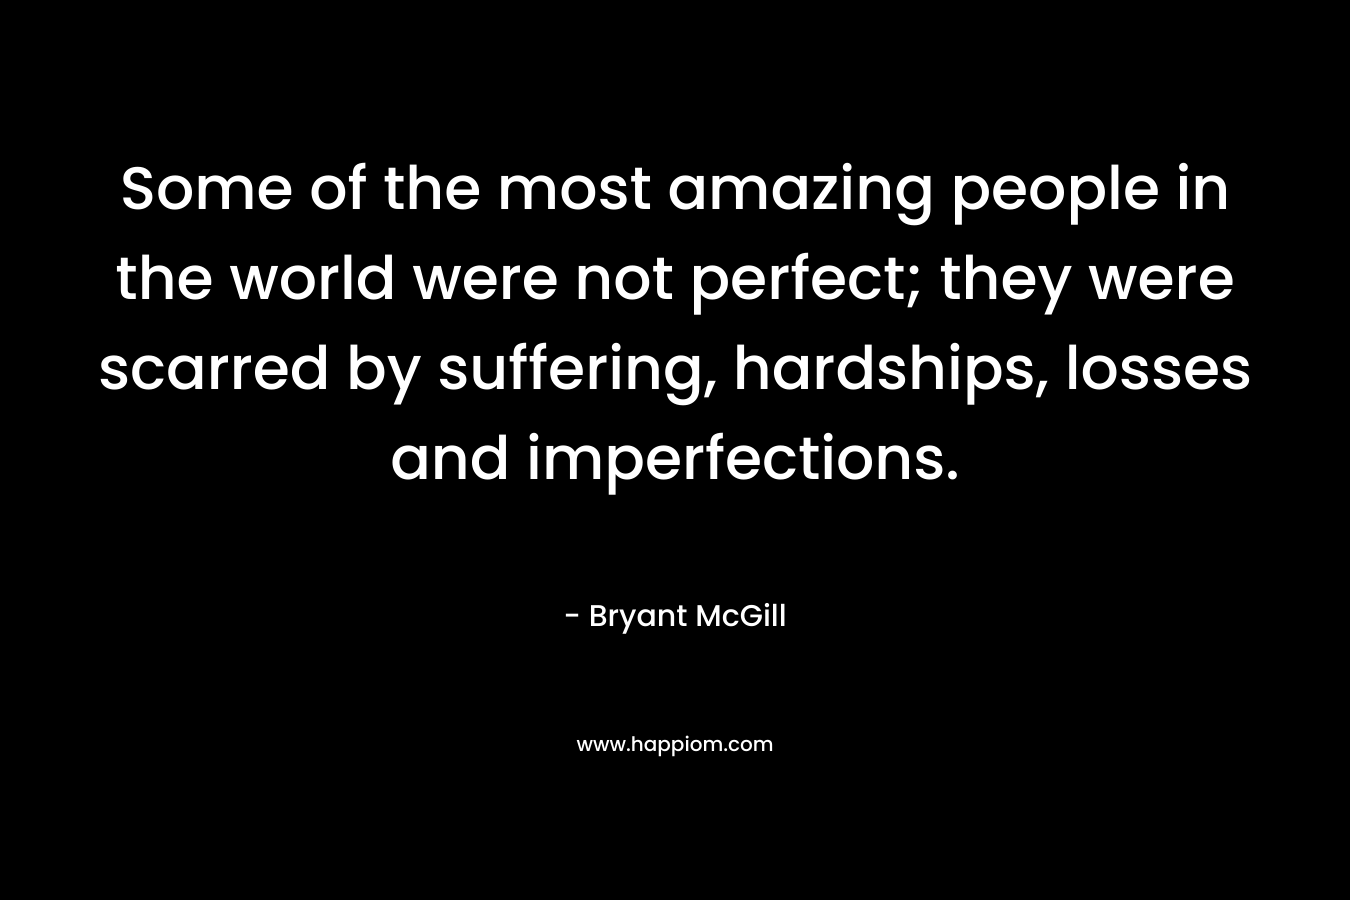 Some of the most amazing people in the world were not perfect; they were scarred by suffering, hardships, losses and imperfections. – Bryant McGill